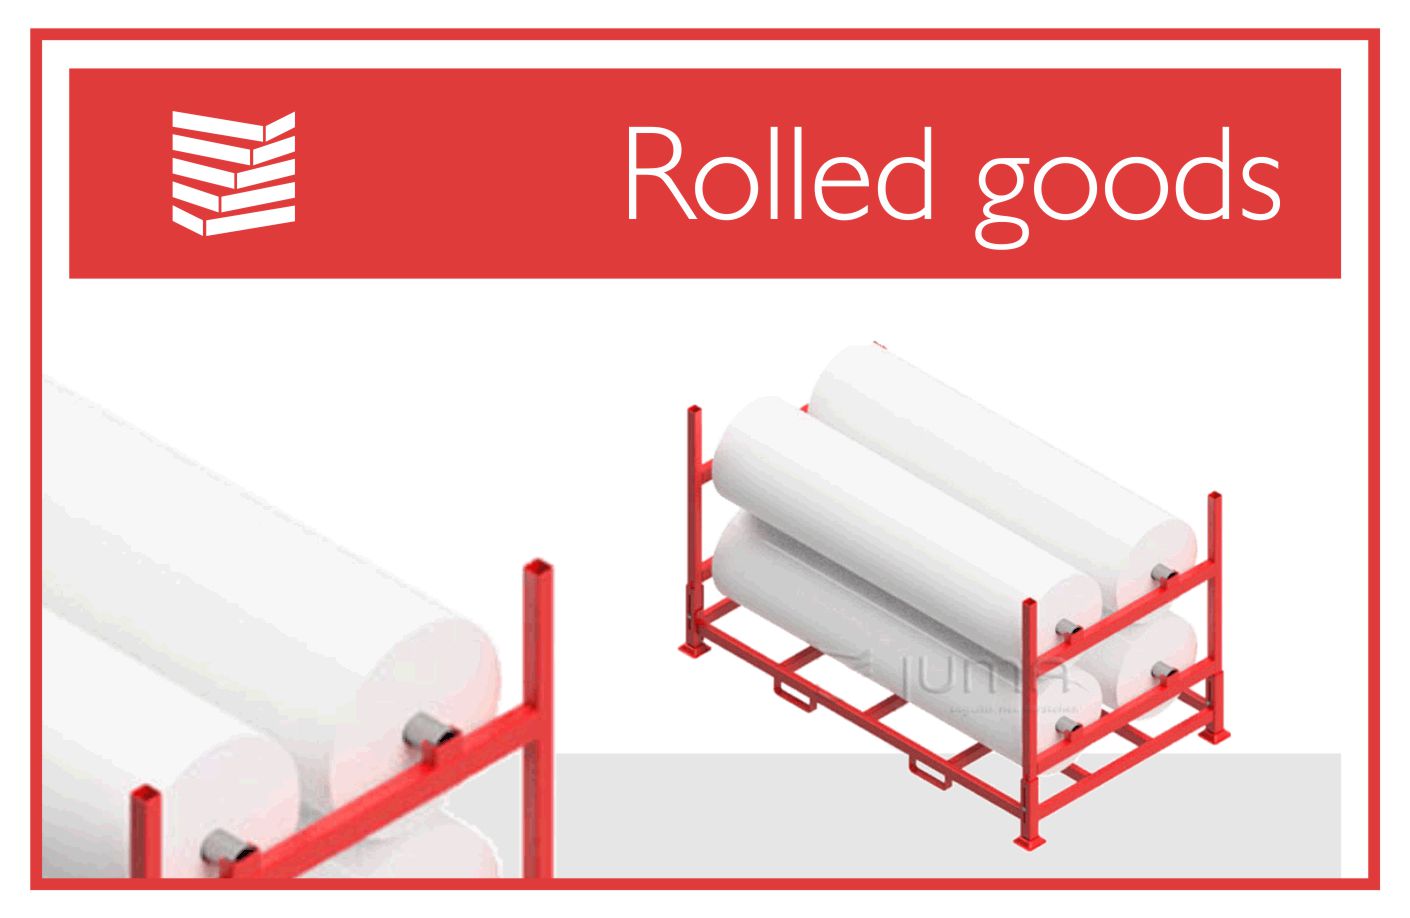 Rolled goods